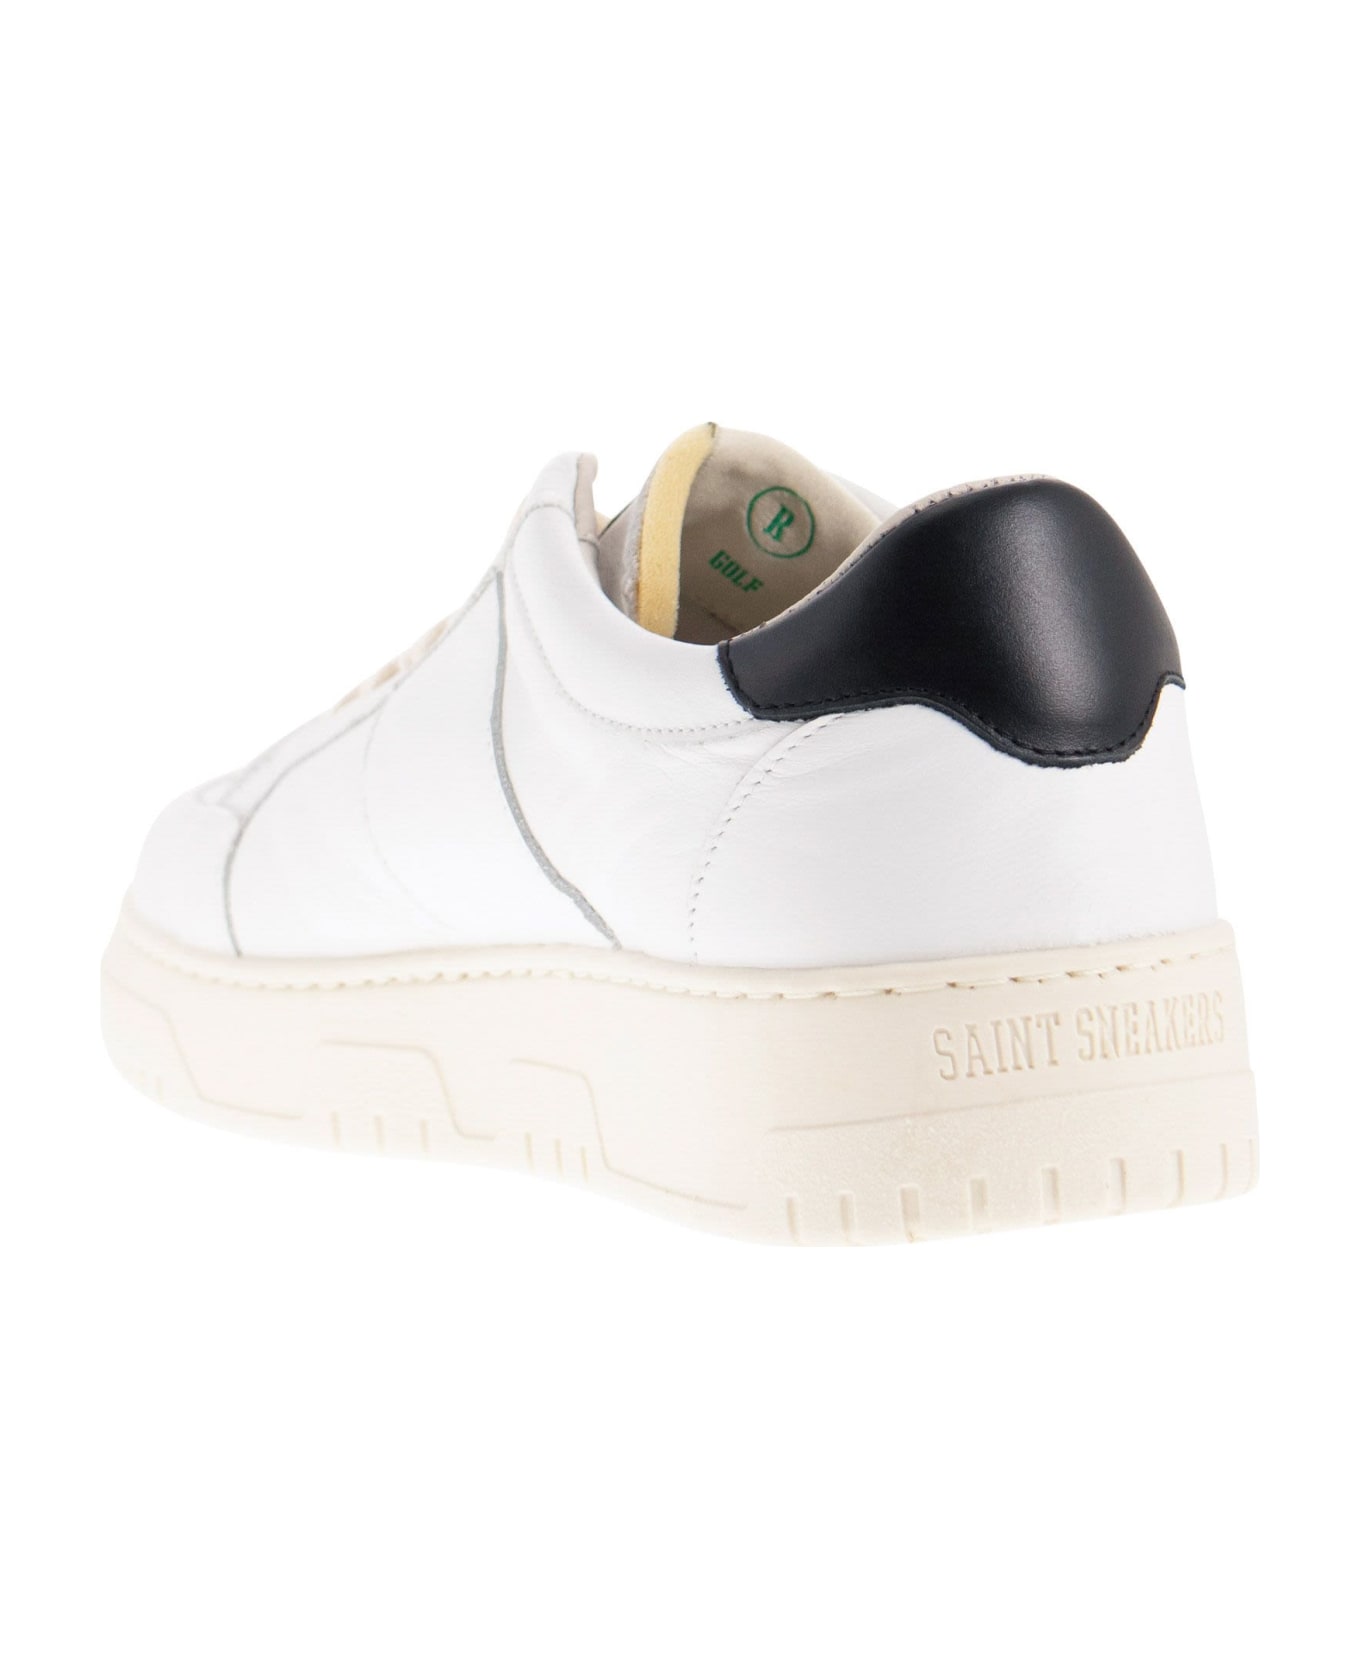 Saint Sneakers Golf - Black And White Trainers - White/black スニーカー